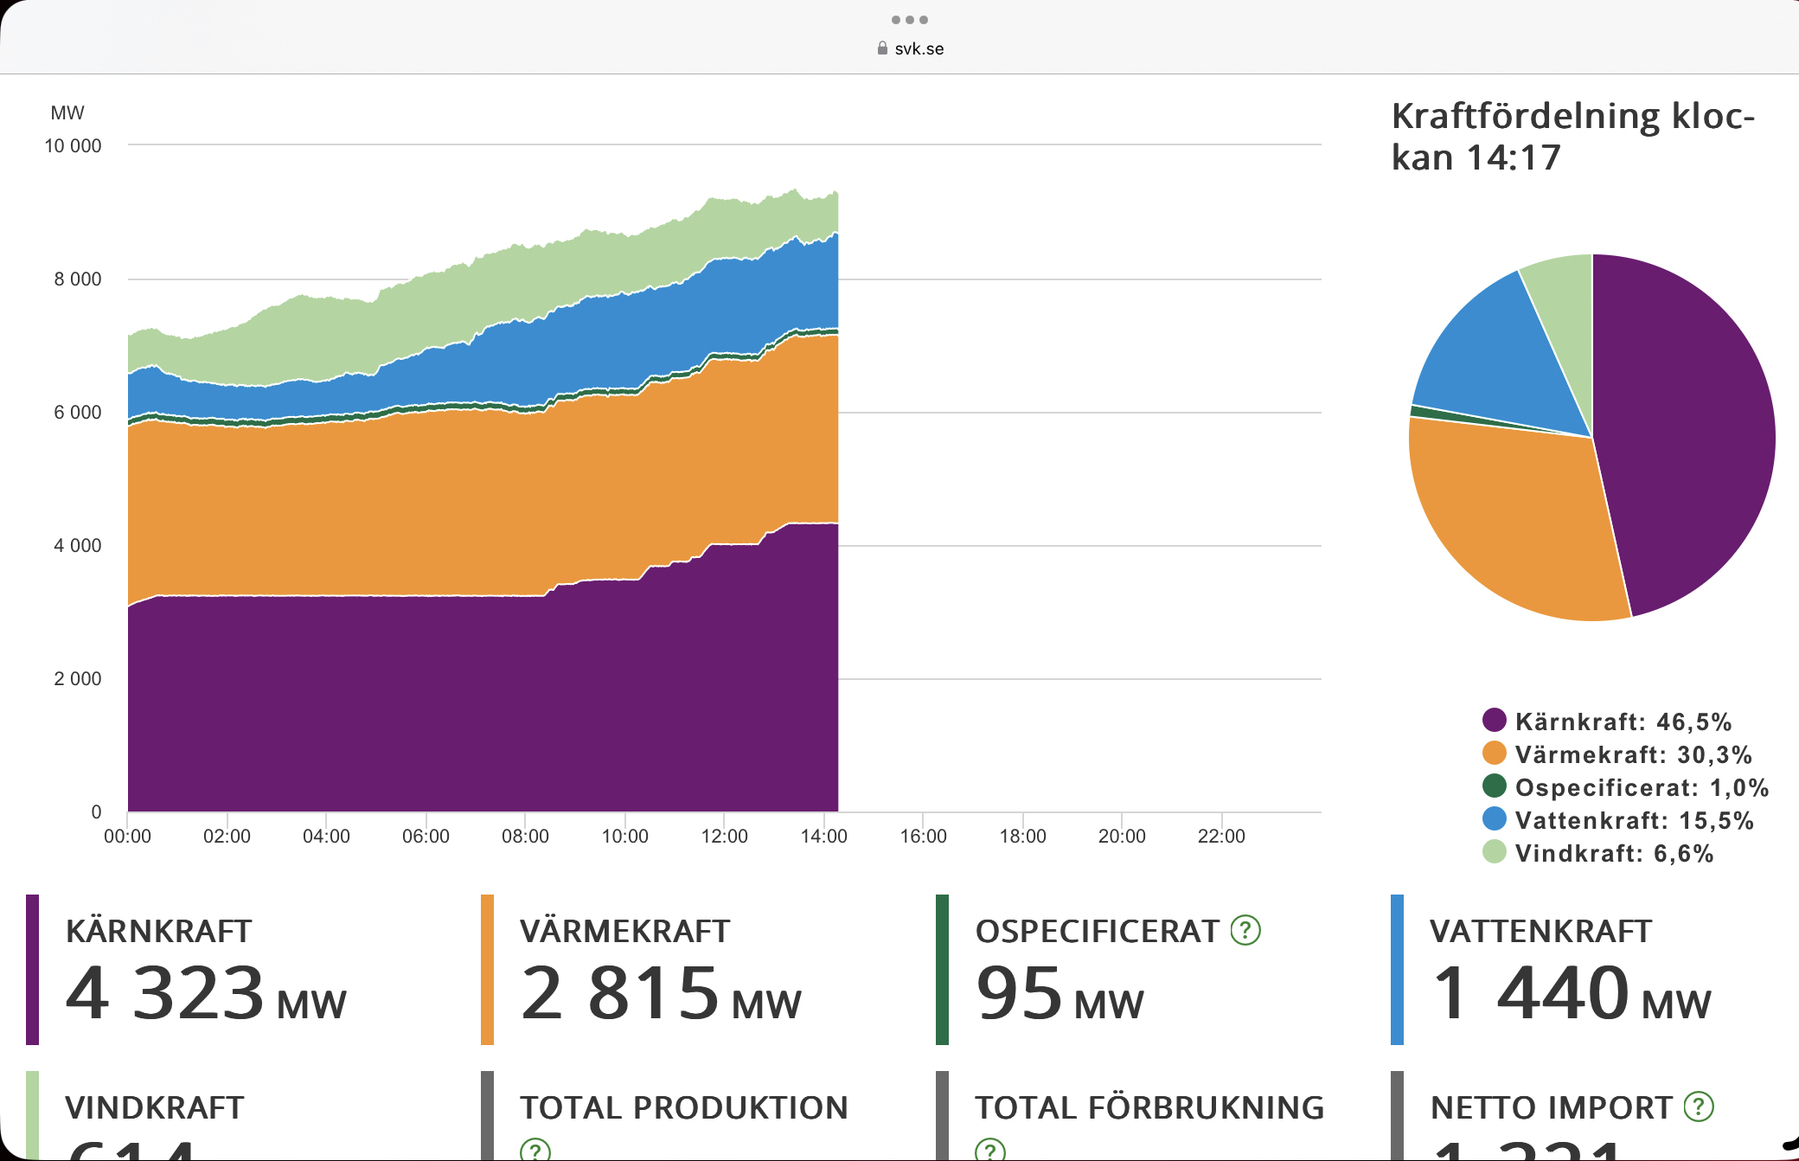 A graph showing energy a breakdown of energy sources in Finland over time (today), with nuclear (“kärnkraft”) growing significantly during the day